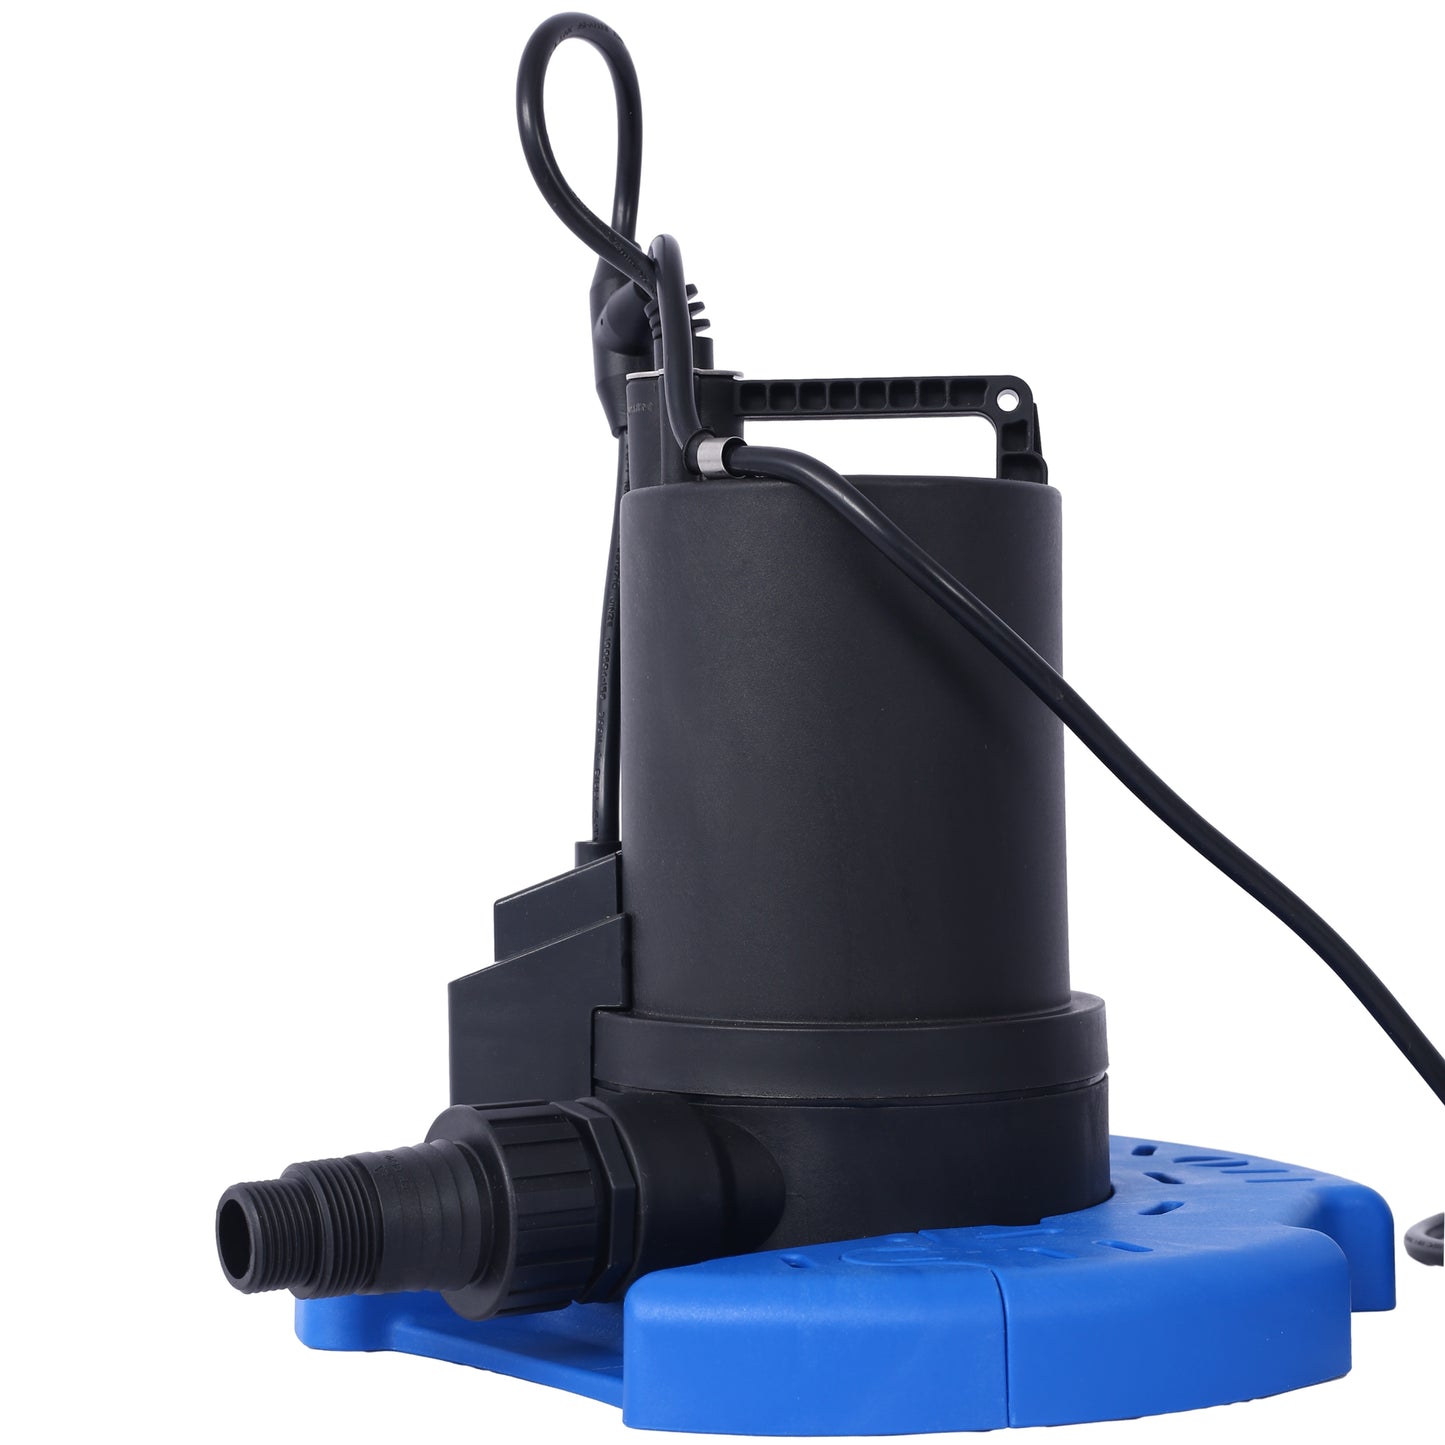 1/4 HP Automatic Swimming Pool Cover Pump 120 V Submersible with 3/4 Check Valve Adapter1850 GPH Water Removal for Pool, Hot Tubs, Rooftops, Water Beds and more